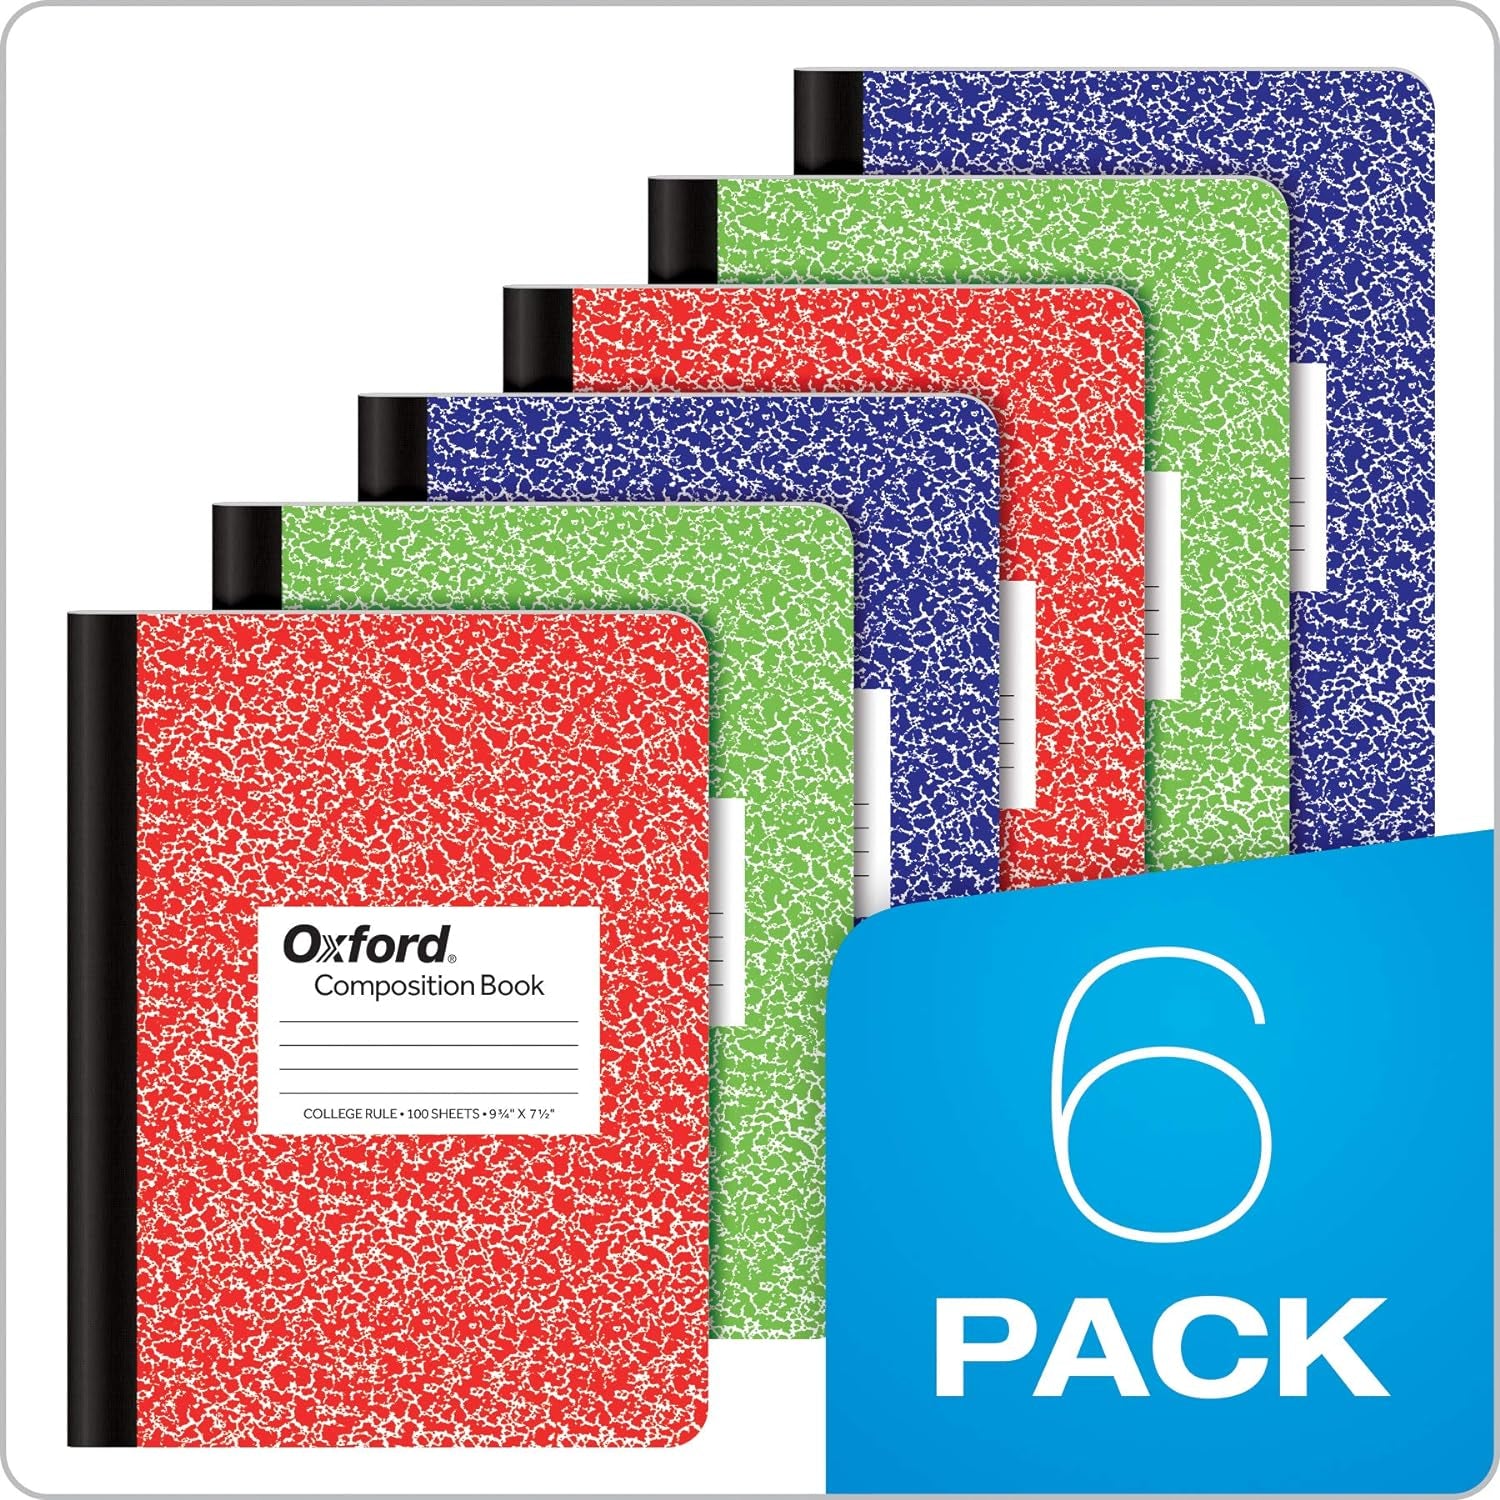 Composition Notebook 6 Pack, College Ruled Paper, 9-3/4 X 7-1/2 Inches, 100 Sheets, Assorted Marble Covers. 2 Each: Blue, Green, Red (63763)